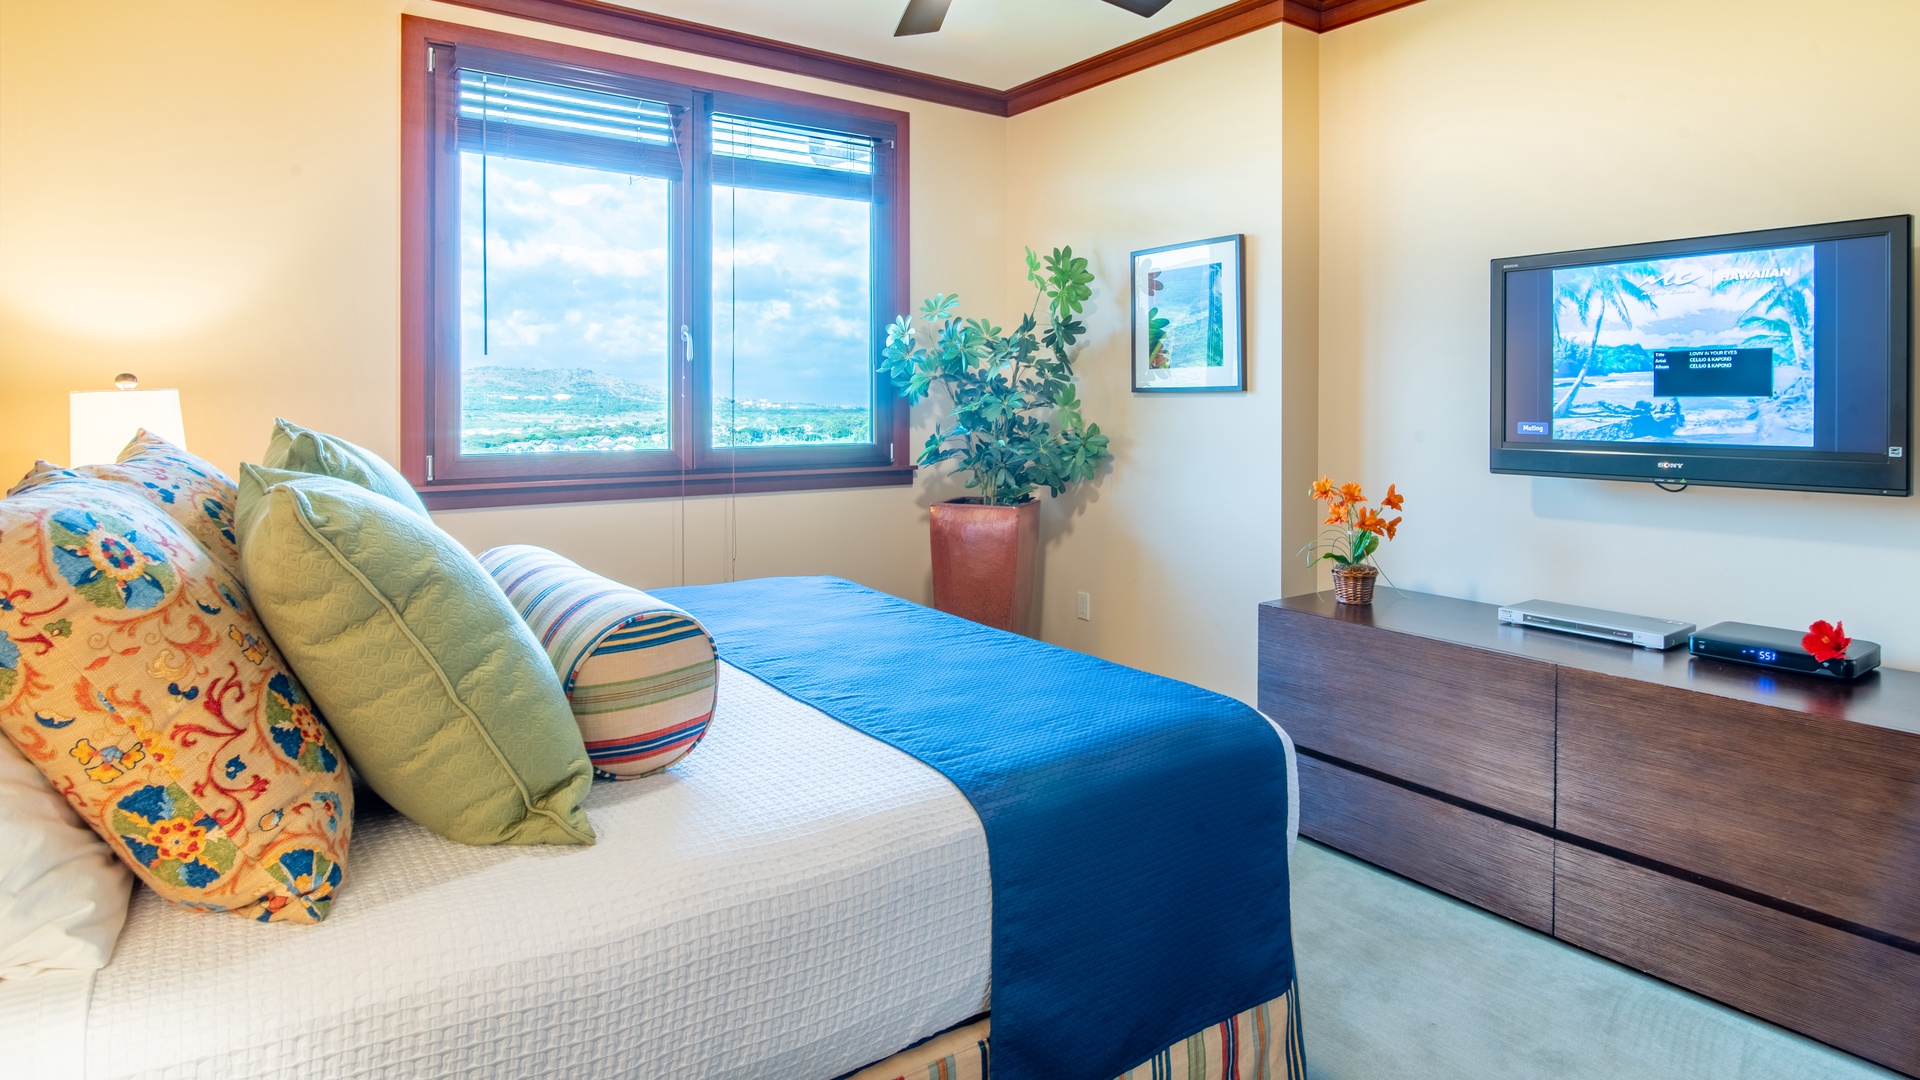 Kapolei Vacation Rentals, Ko Olina Beach Villas O1604 - The primary guest bedroom has a king size bed and mountain views.